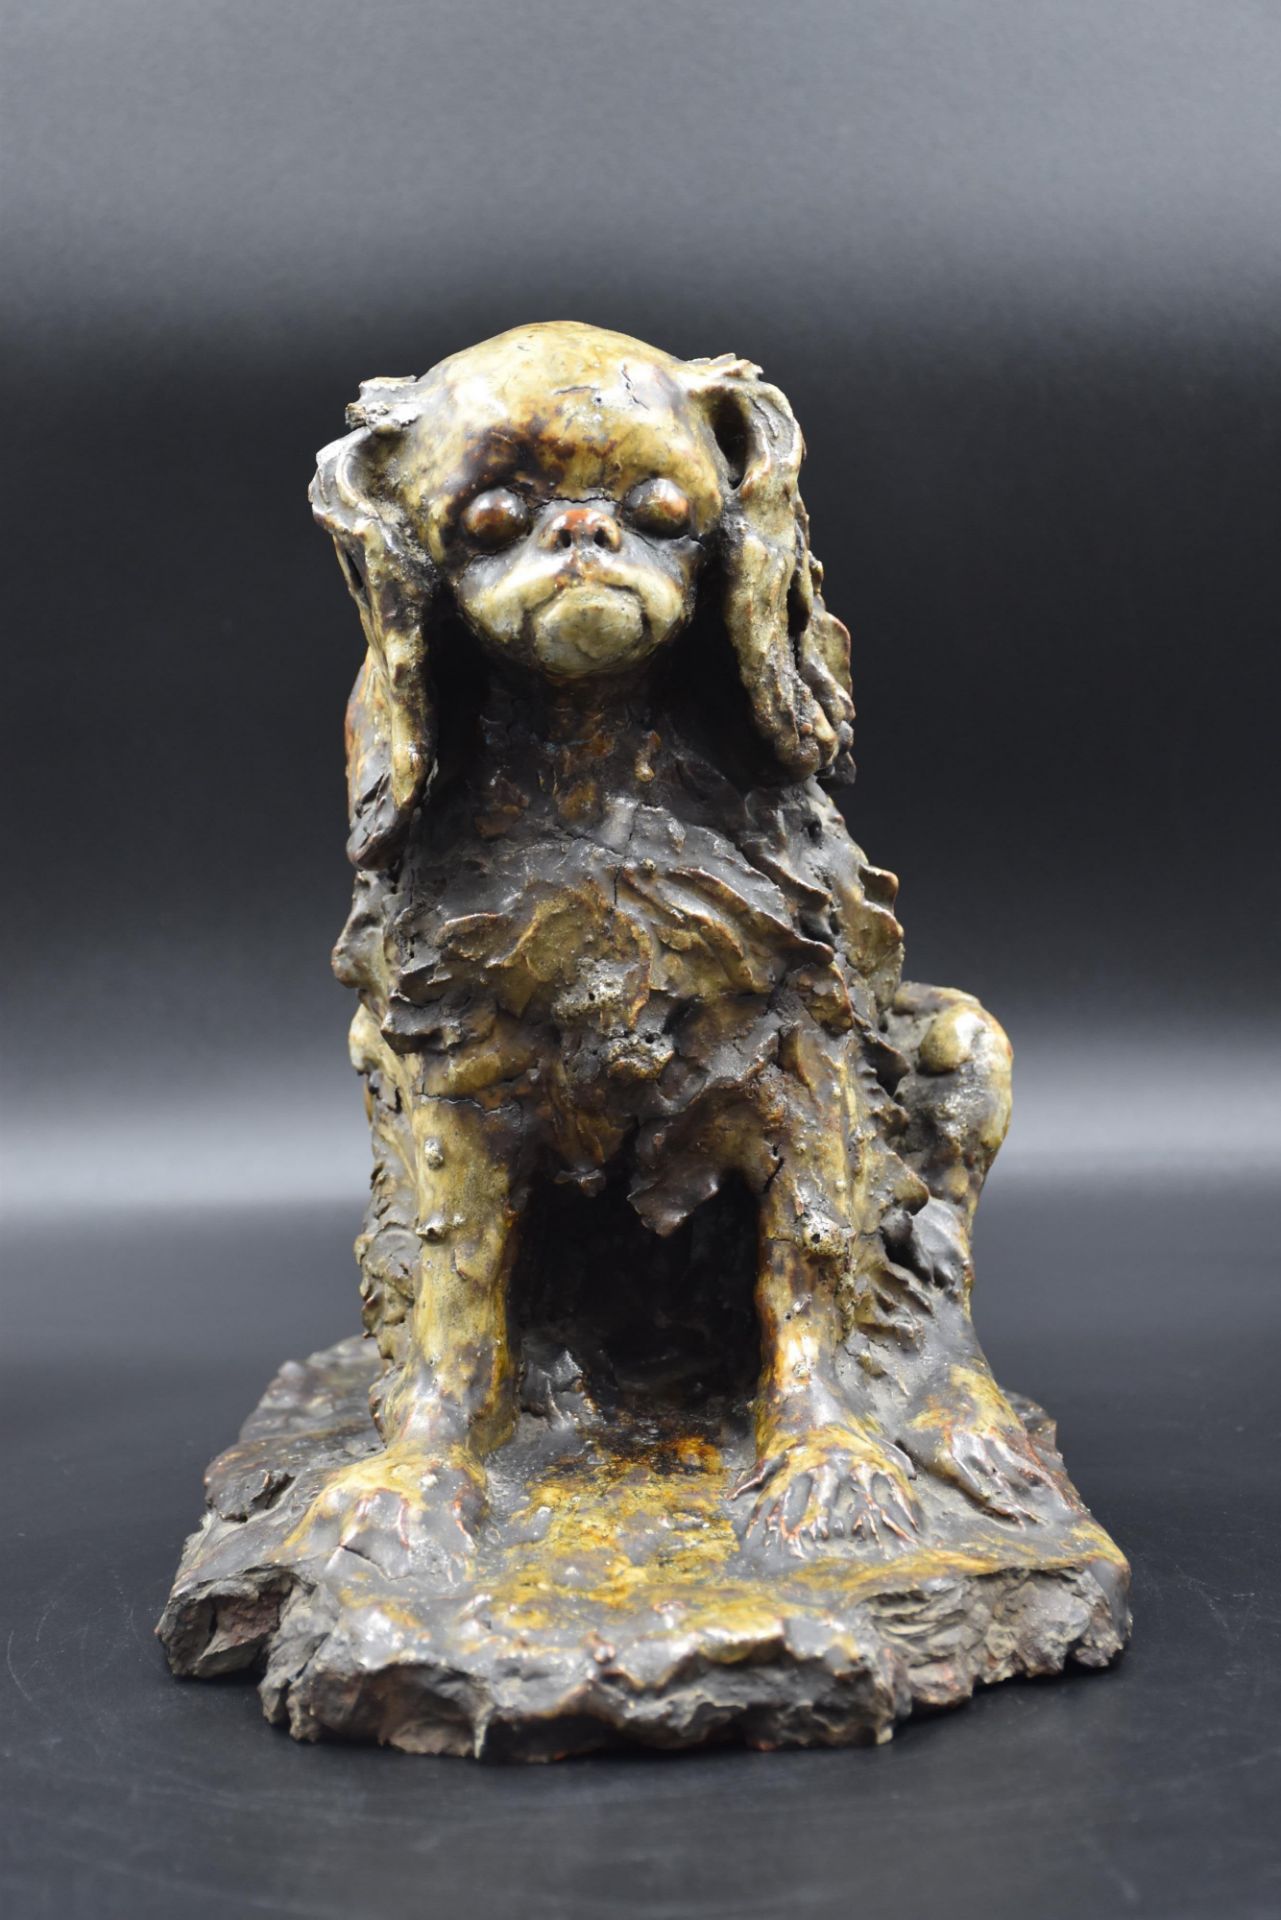 Enamelled stoneware sculpture circa 1940 representing a cocker spaniel. Signed on the terrace on the